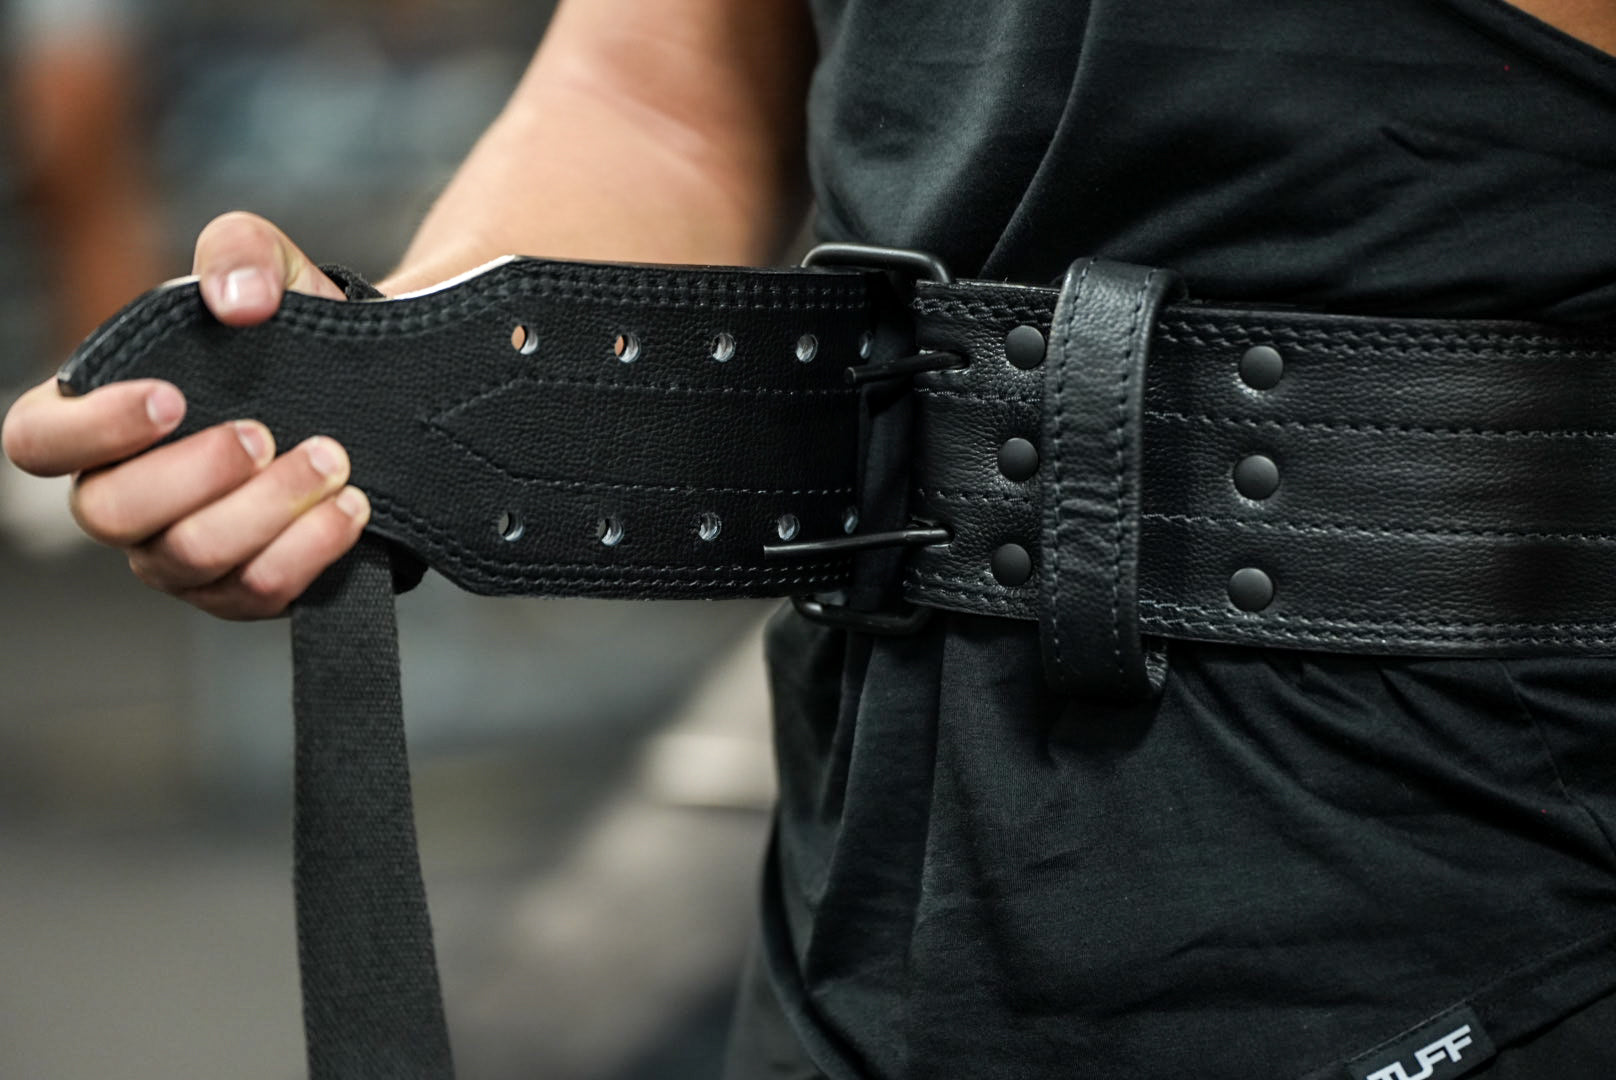 The Best Weight Lifting Belts to Help You Safely Lift Heavier In 2021